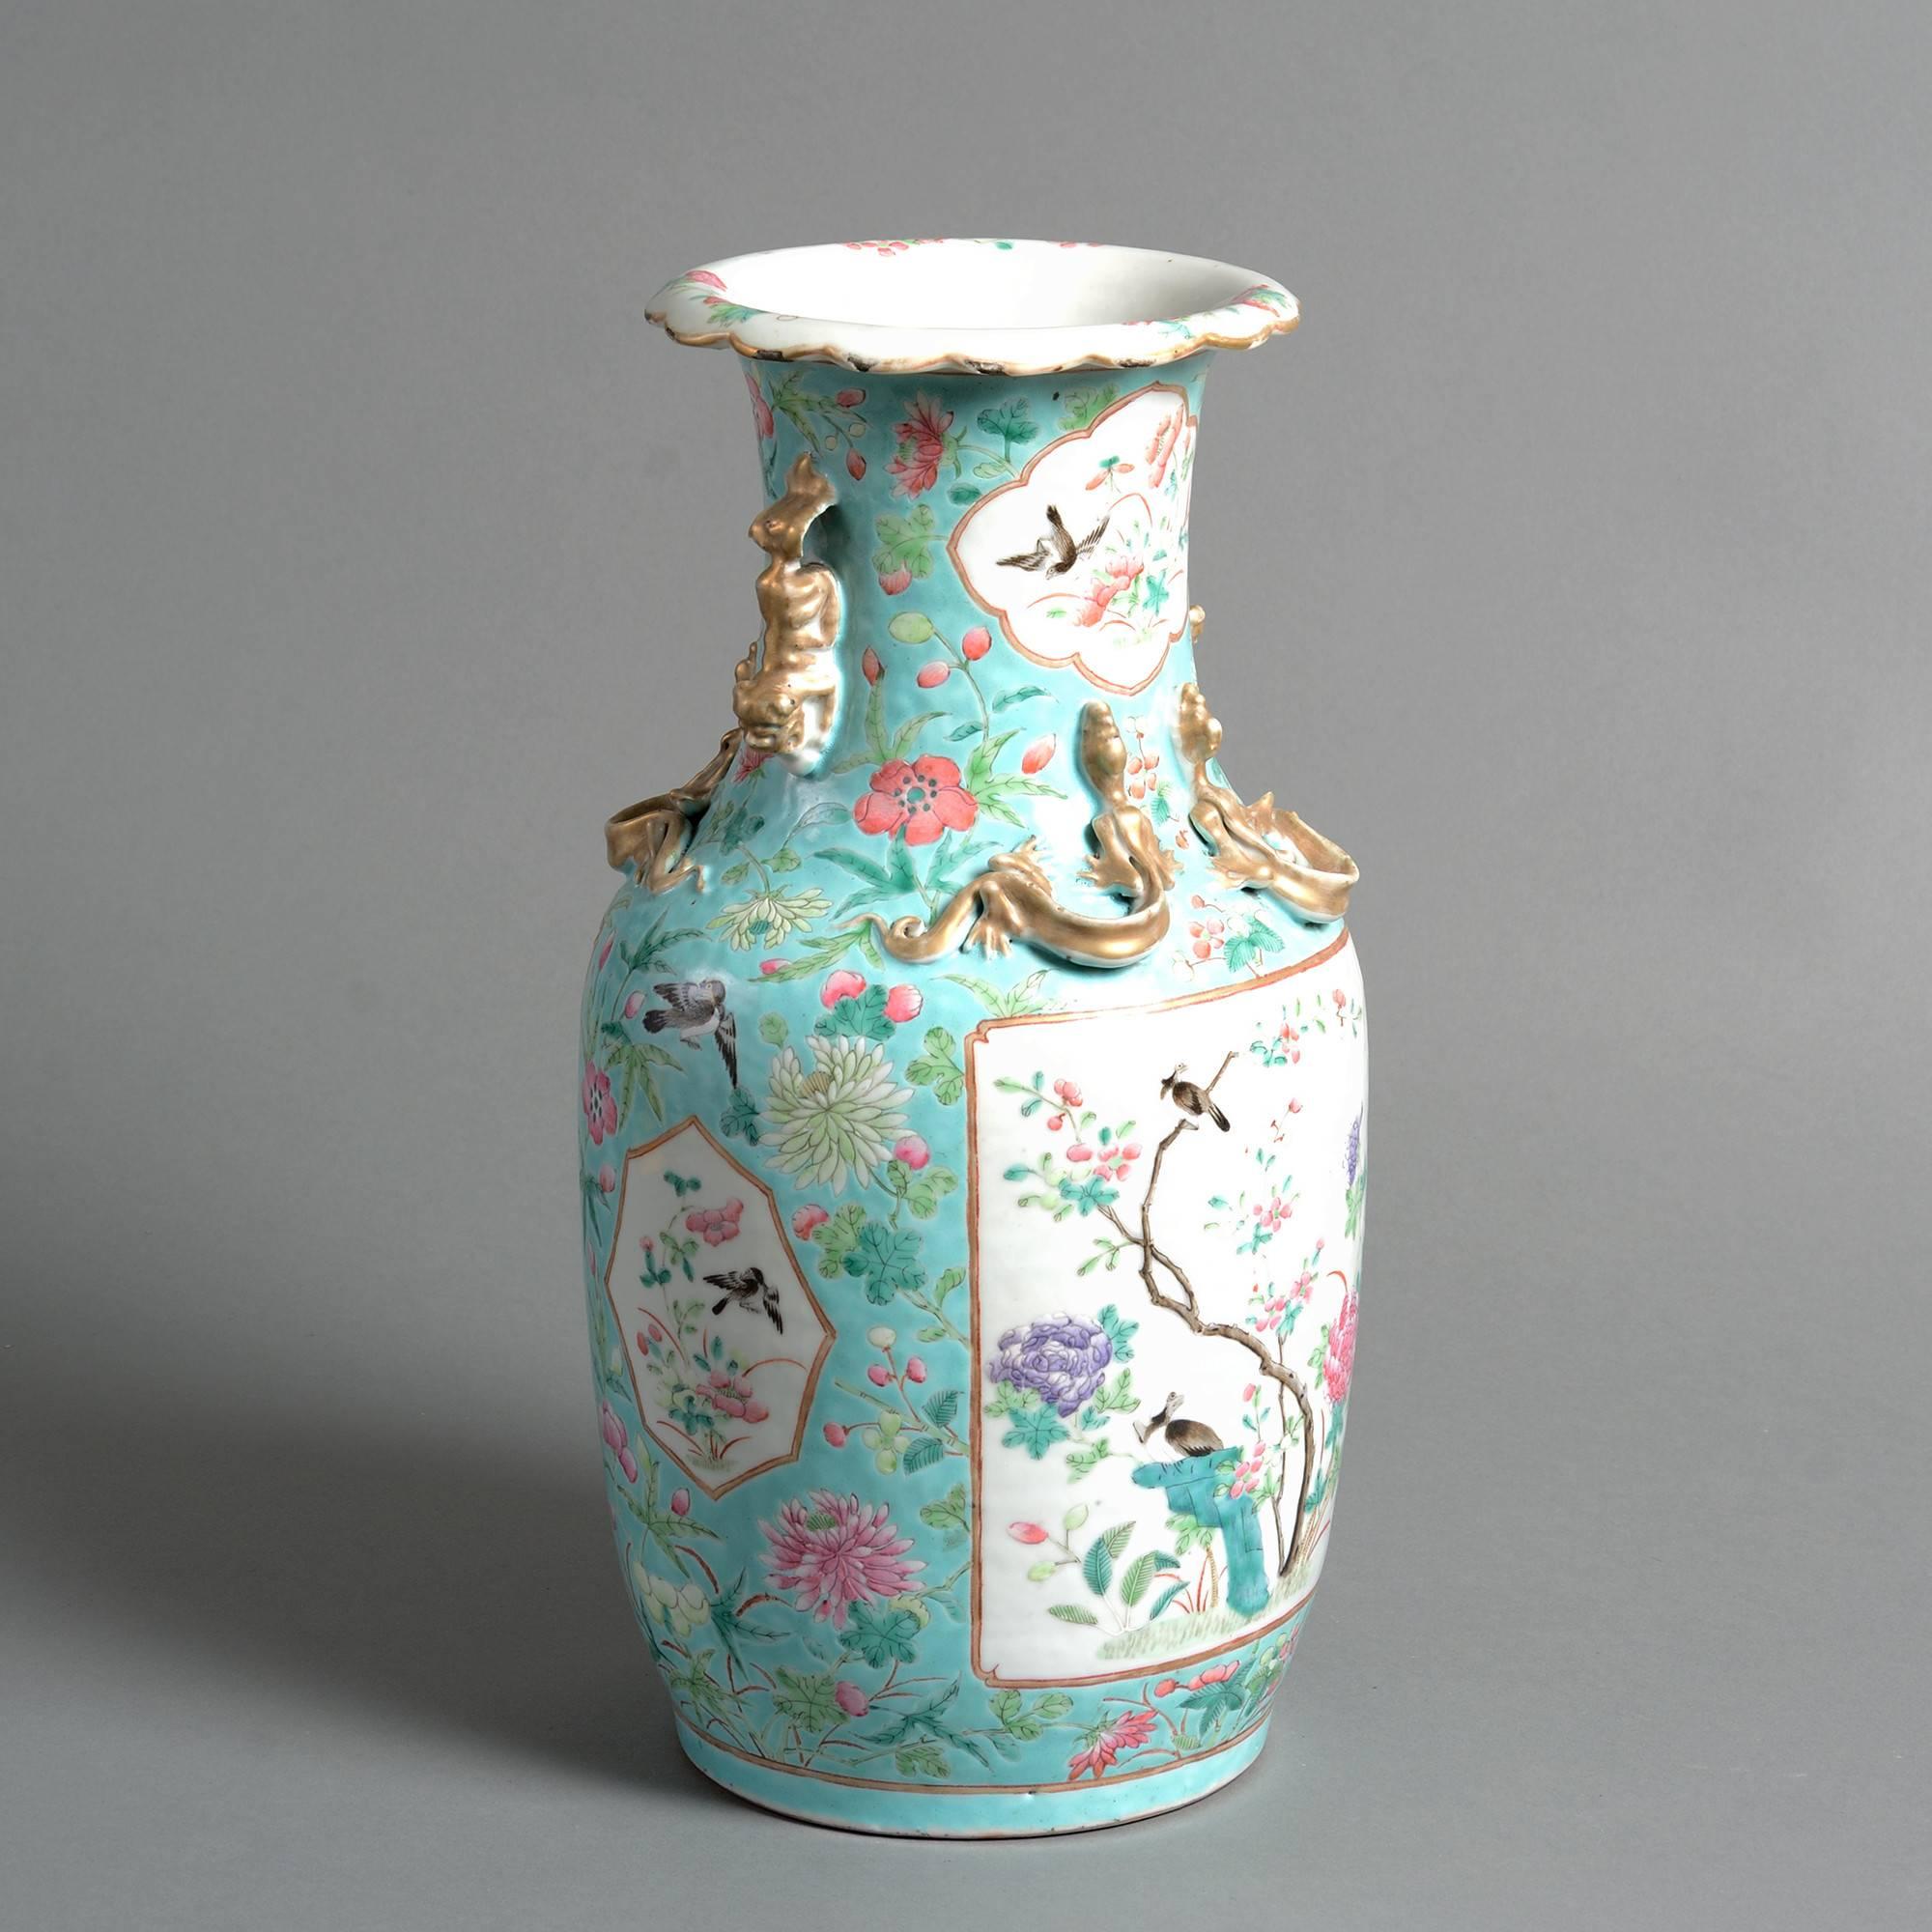 A fine late 19th century Canton porcelain vase with applied gilded handles and lizards, the body with ornithological and floral scenes in famille rose glazes upon a turquoise ground. 

Qing dynasty, Guangxu period (1875-1908).